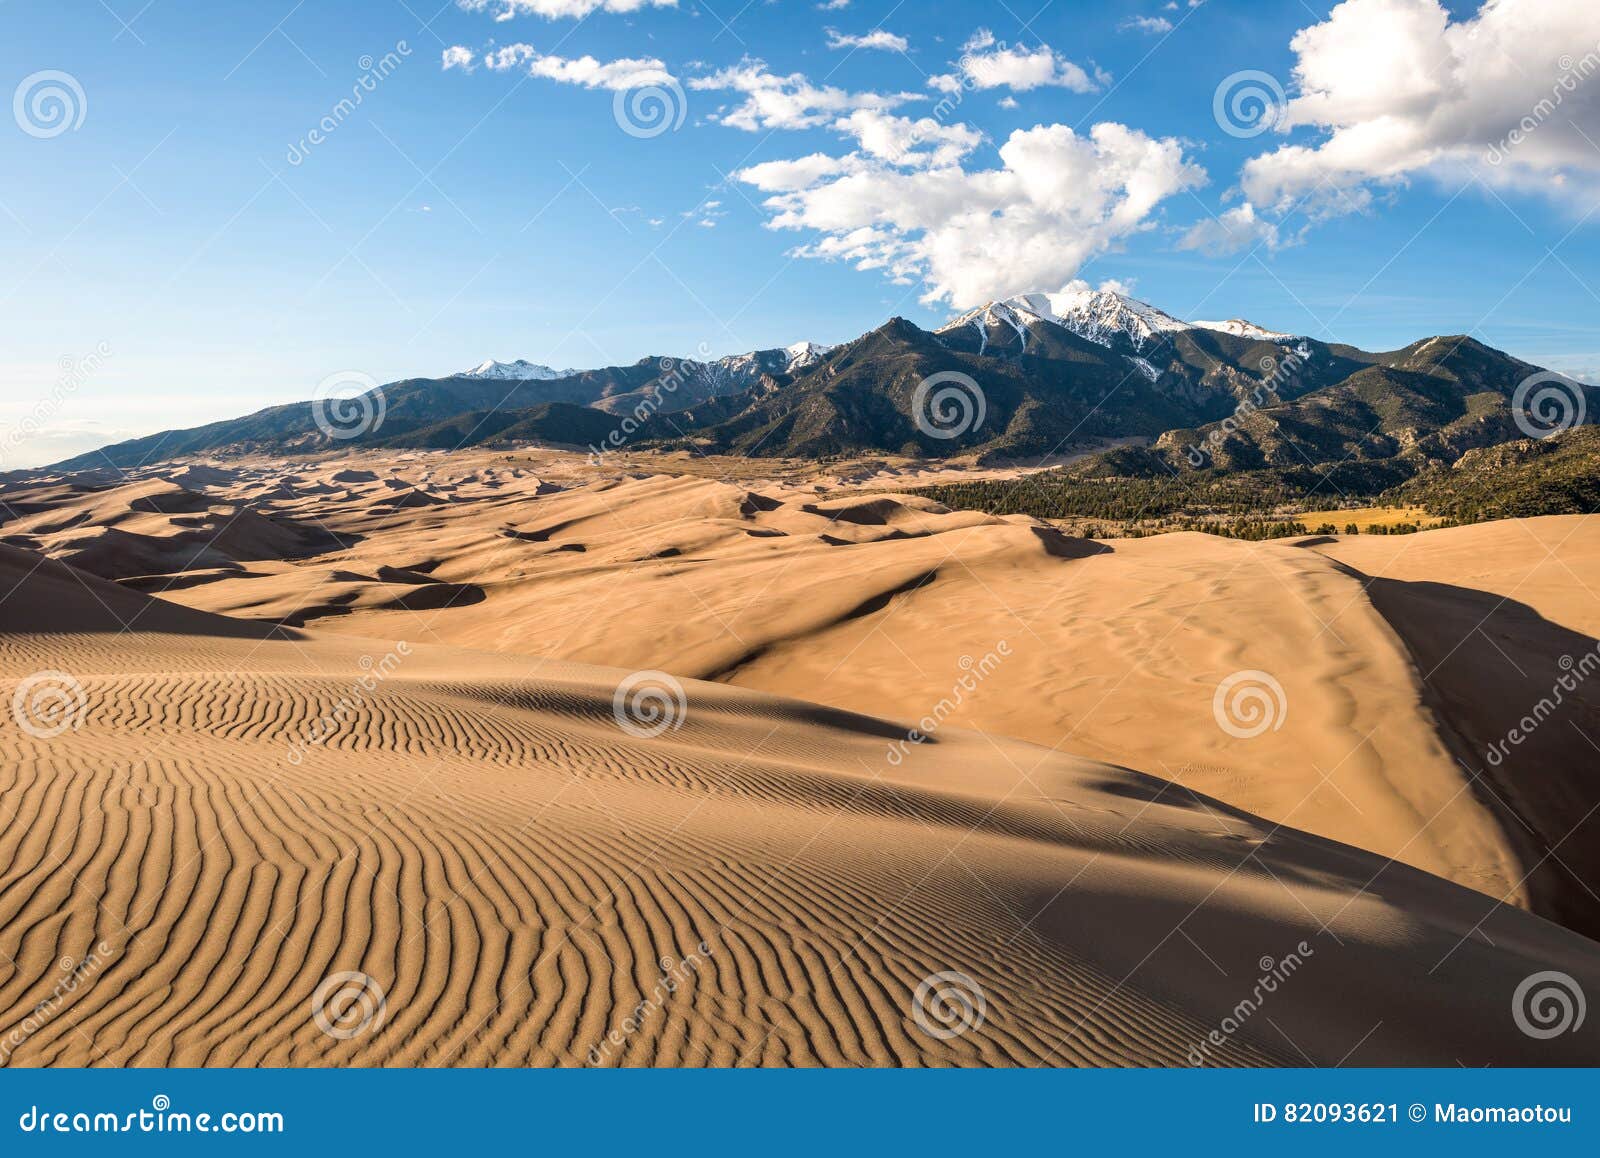 sunset at great sand dunes